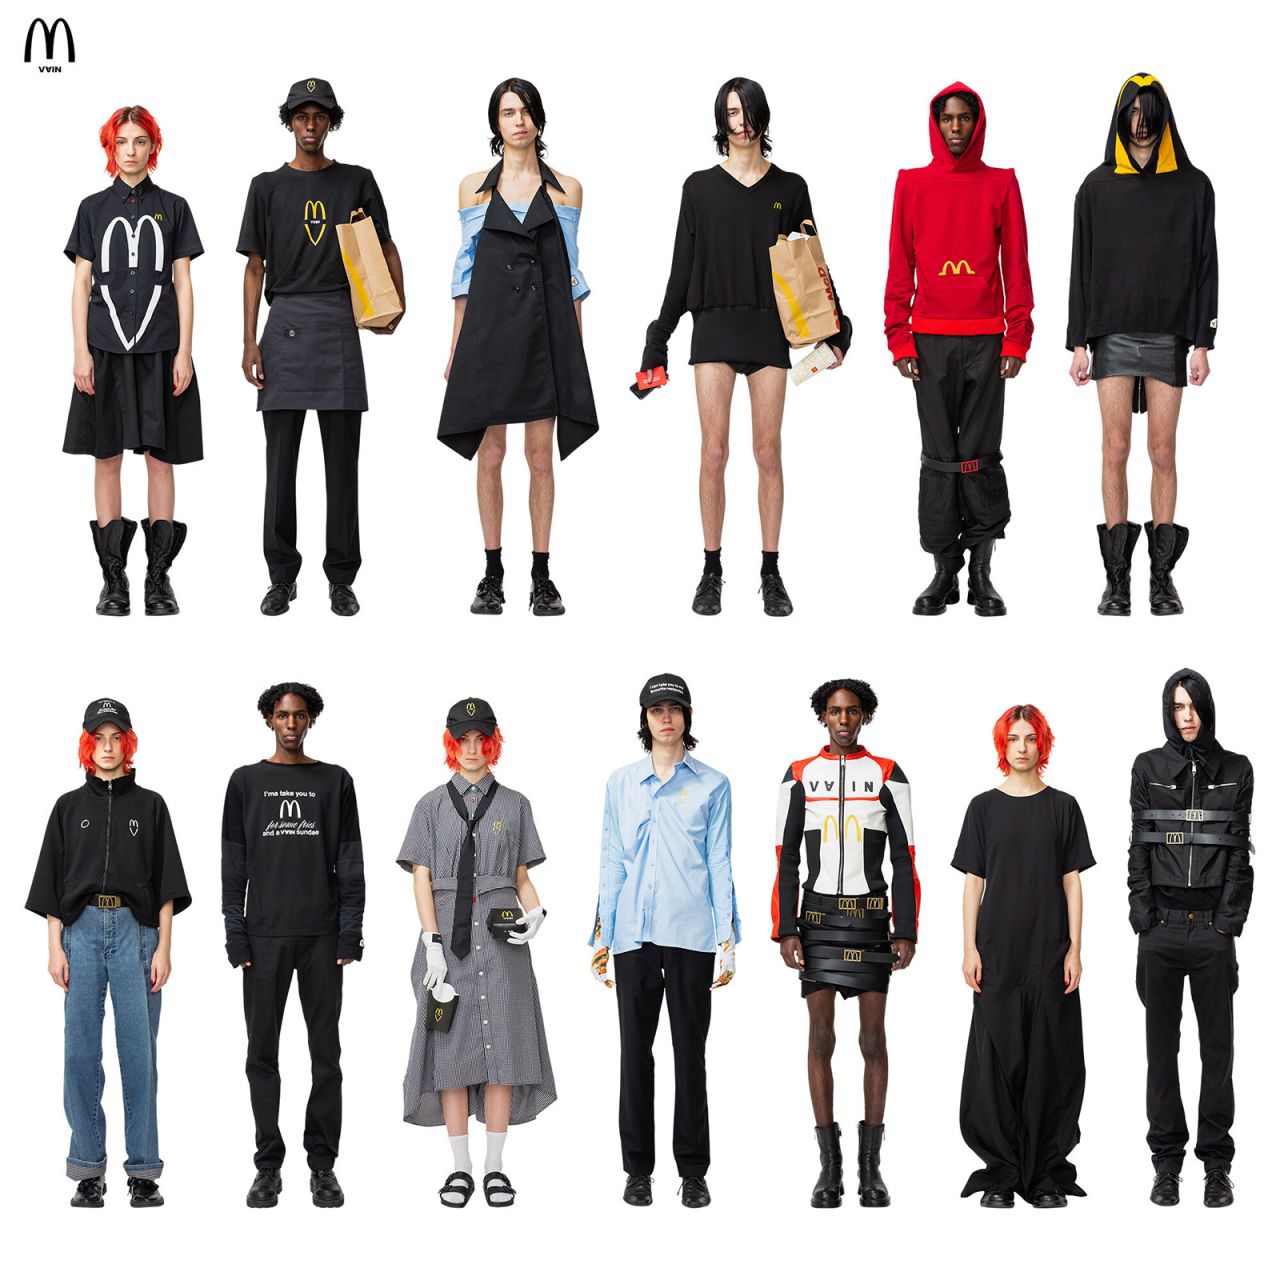 The collection used a combination of McDonald's uniforms and other textiles to create one-of-a-kind garments.